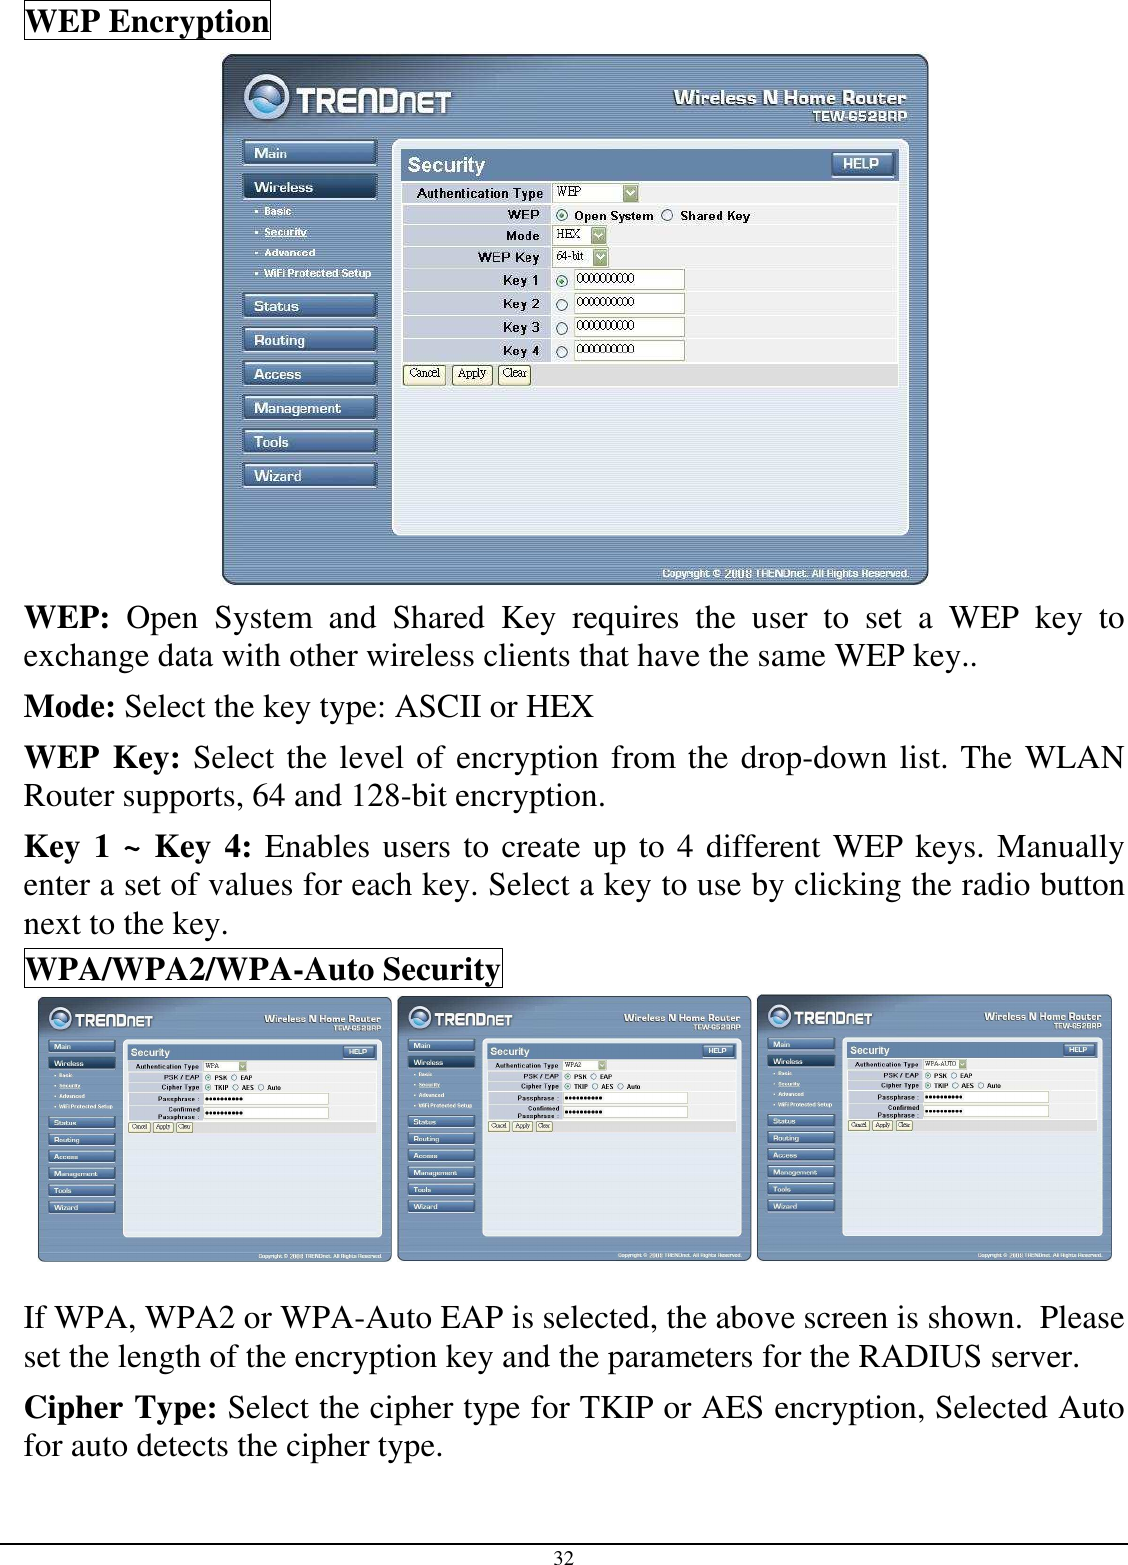 32 WEP Encryption  WEP:  Open  System  and  Shared  Key  requires  the  user  to  set  a  WEP  key  to exchange data with other wireless clients that have the same WEP key.. Mode: Select the key type: ASCII or HEX WEP Key: Select the level of encryption from the drop-down list. The WLAN Router supports, 64 and 128-bit encryption. Key 1 ~ Key 4: Enables users to create up to 4 different WEP keys. Manually enter a set of values for each key. Select a key to use by clicking the radio button next to the key. WPA/WPA2/WPA-Auto Security       If WPA, WPA2 or WPA-Auto EAP is selected, the above screen is shown.  Please set the length of the encryption key and the parameters for the RADIUS server. Cipher Type: Select the cipher type for TKIP or AES encryption, Selected Auto for auto detects the cipher type.  